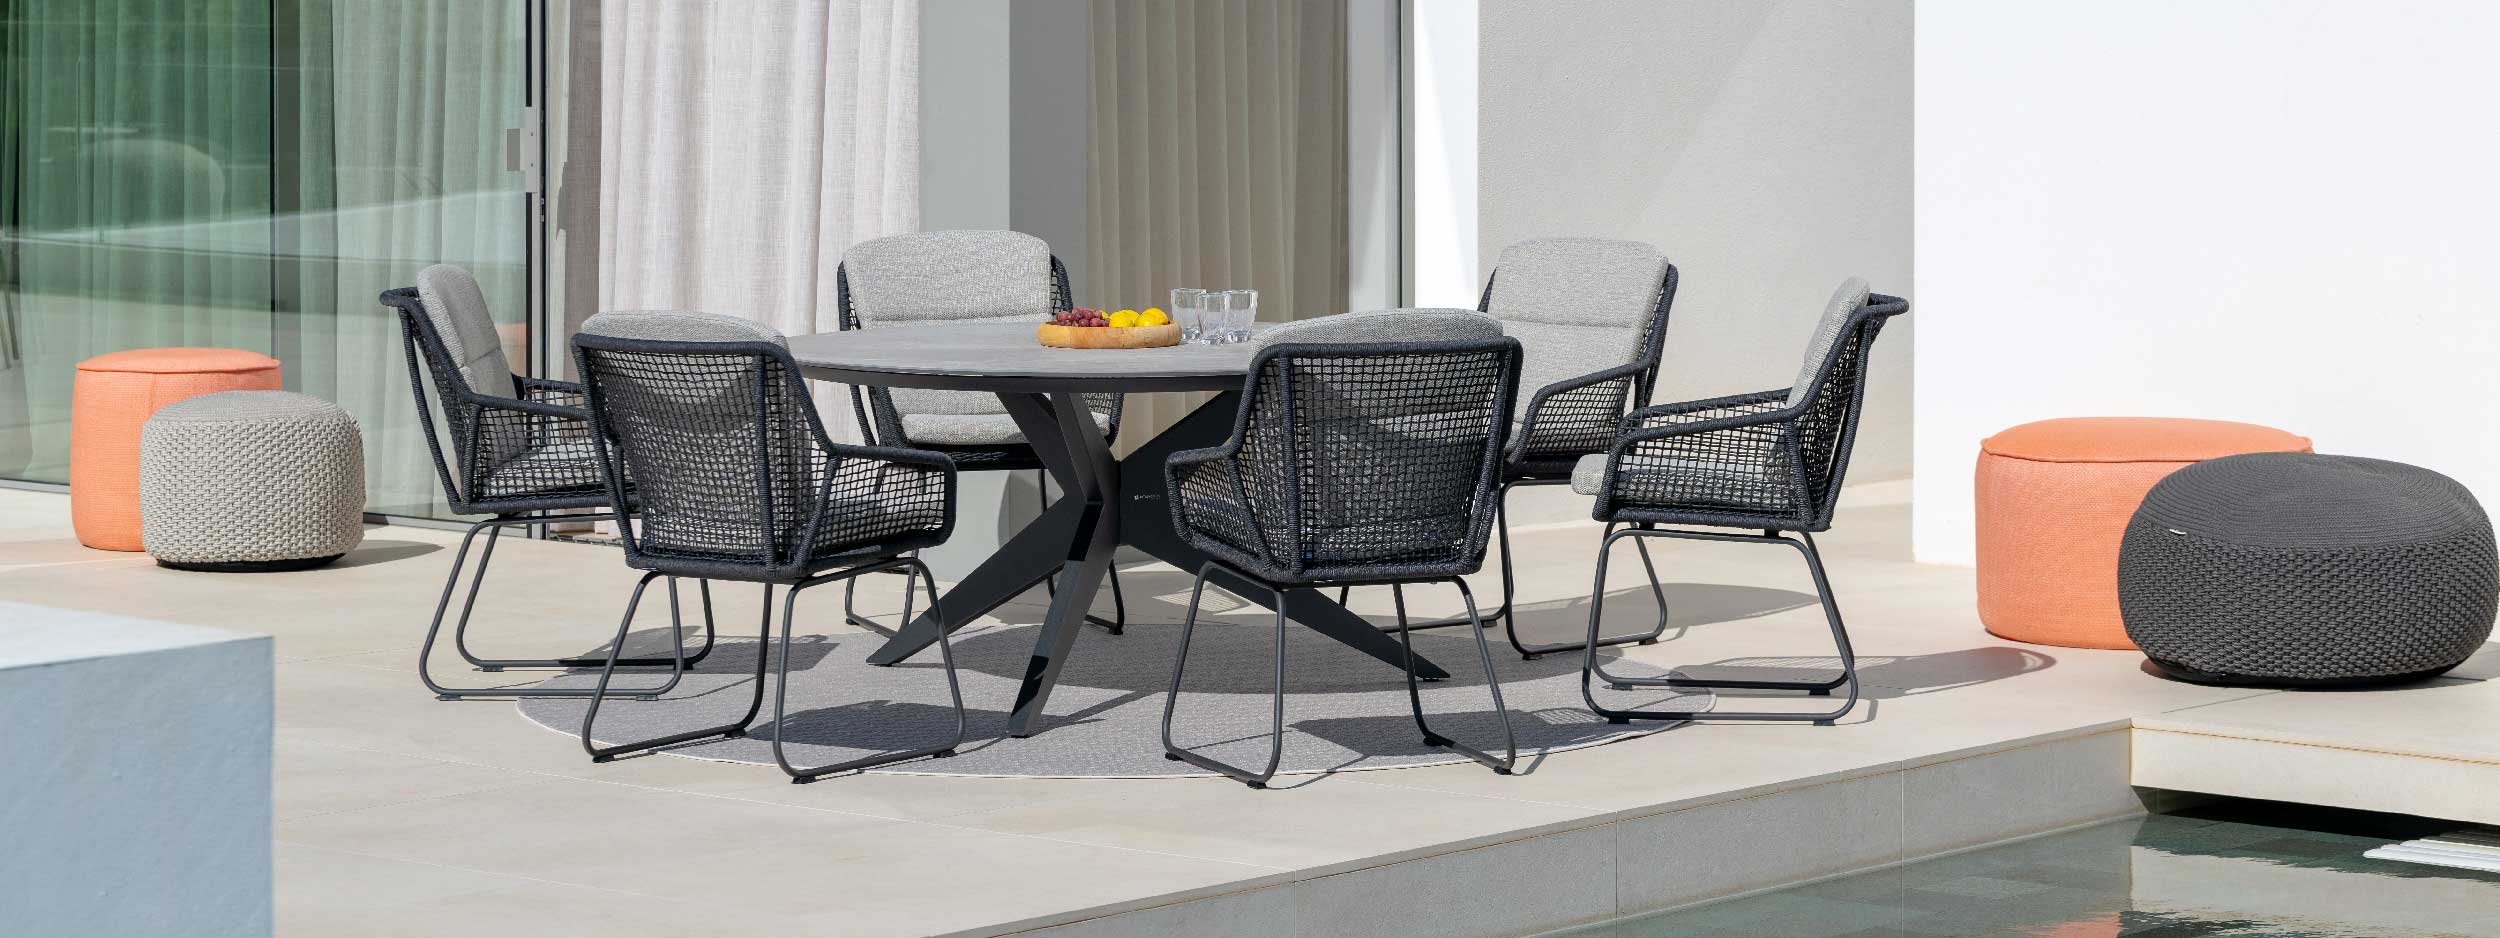 Image of Yate round ceramic garden table and Alden charcoal coloured dining chairs